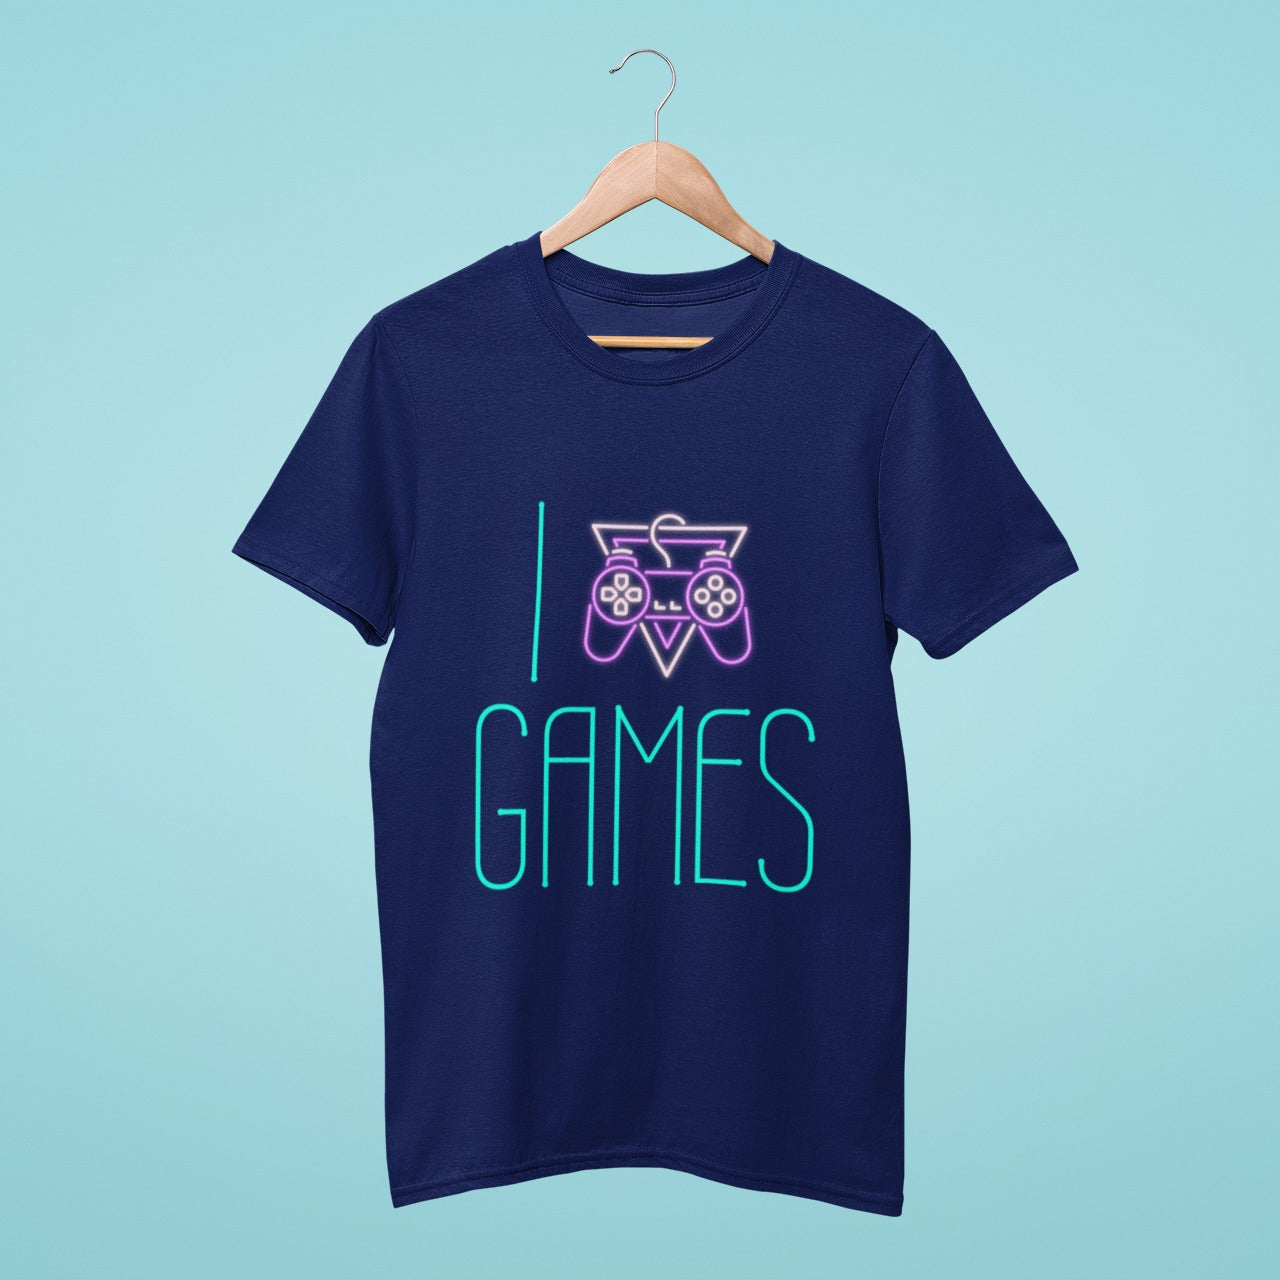 "I ❤️ Games" like never before! Show your love for gaming with this navy blue t-shirt featuring a fun and creative design of a joystick replacing the heart. Perfect for gamers of all ages and levels, this shirt will surely level up your gaming style.